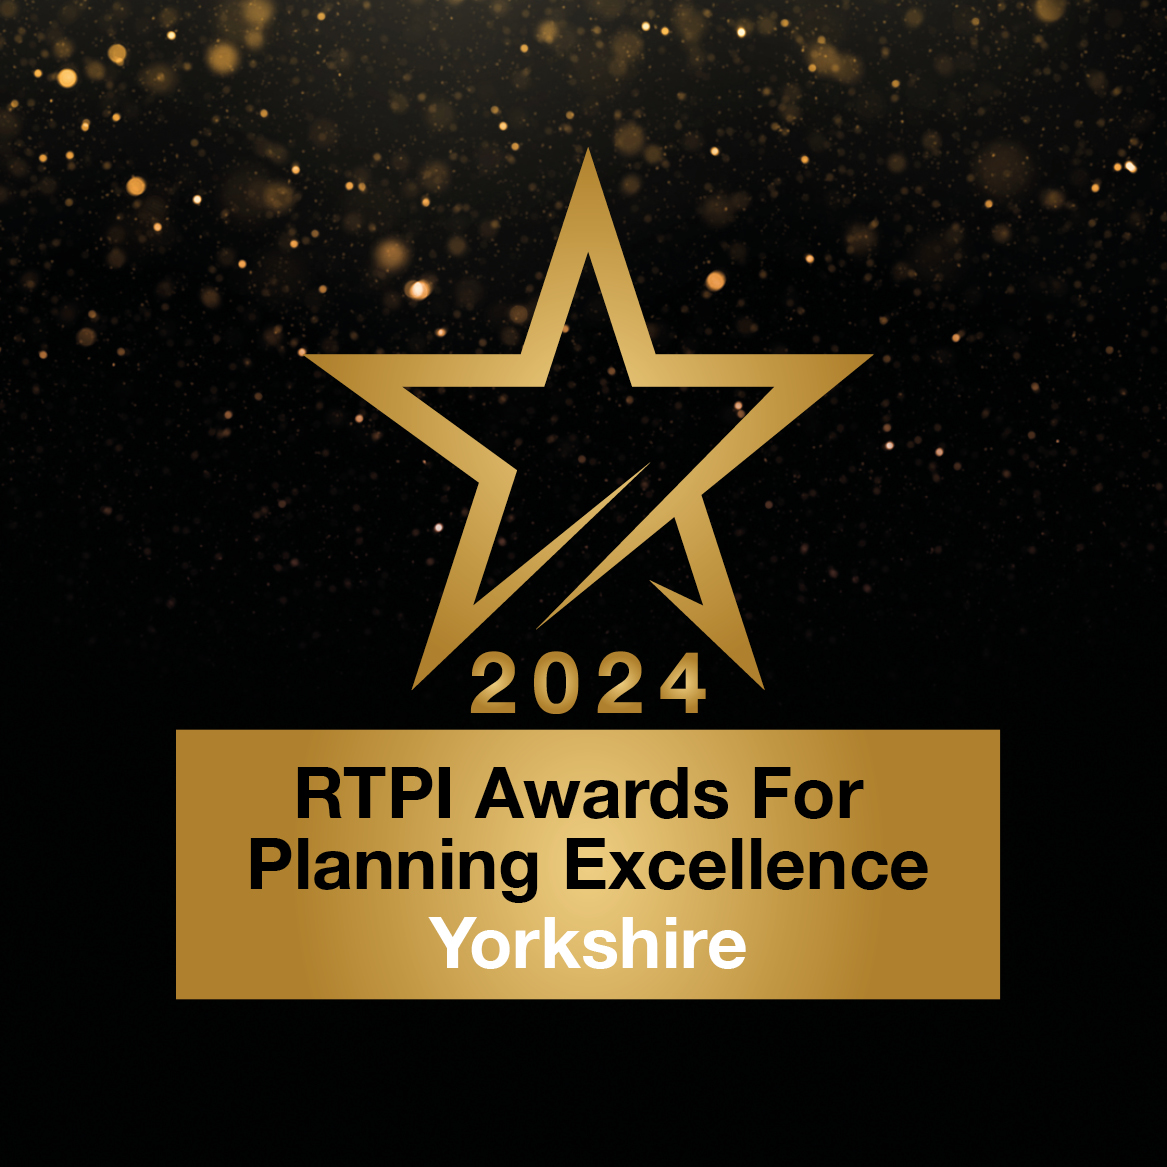 🎵 'It's the final countdown'🎵 Hurry, there’s just one week remaining to get your entry in for the RTPI Awards for Planning Excellence - the premier awards for the planning profession. Enter by 15 March, 11:59pm for your chance to win. Good luck!🤞lnkd.in/ezcXQAMS